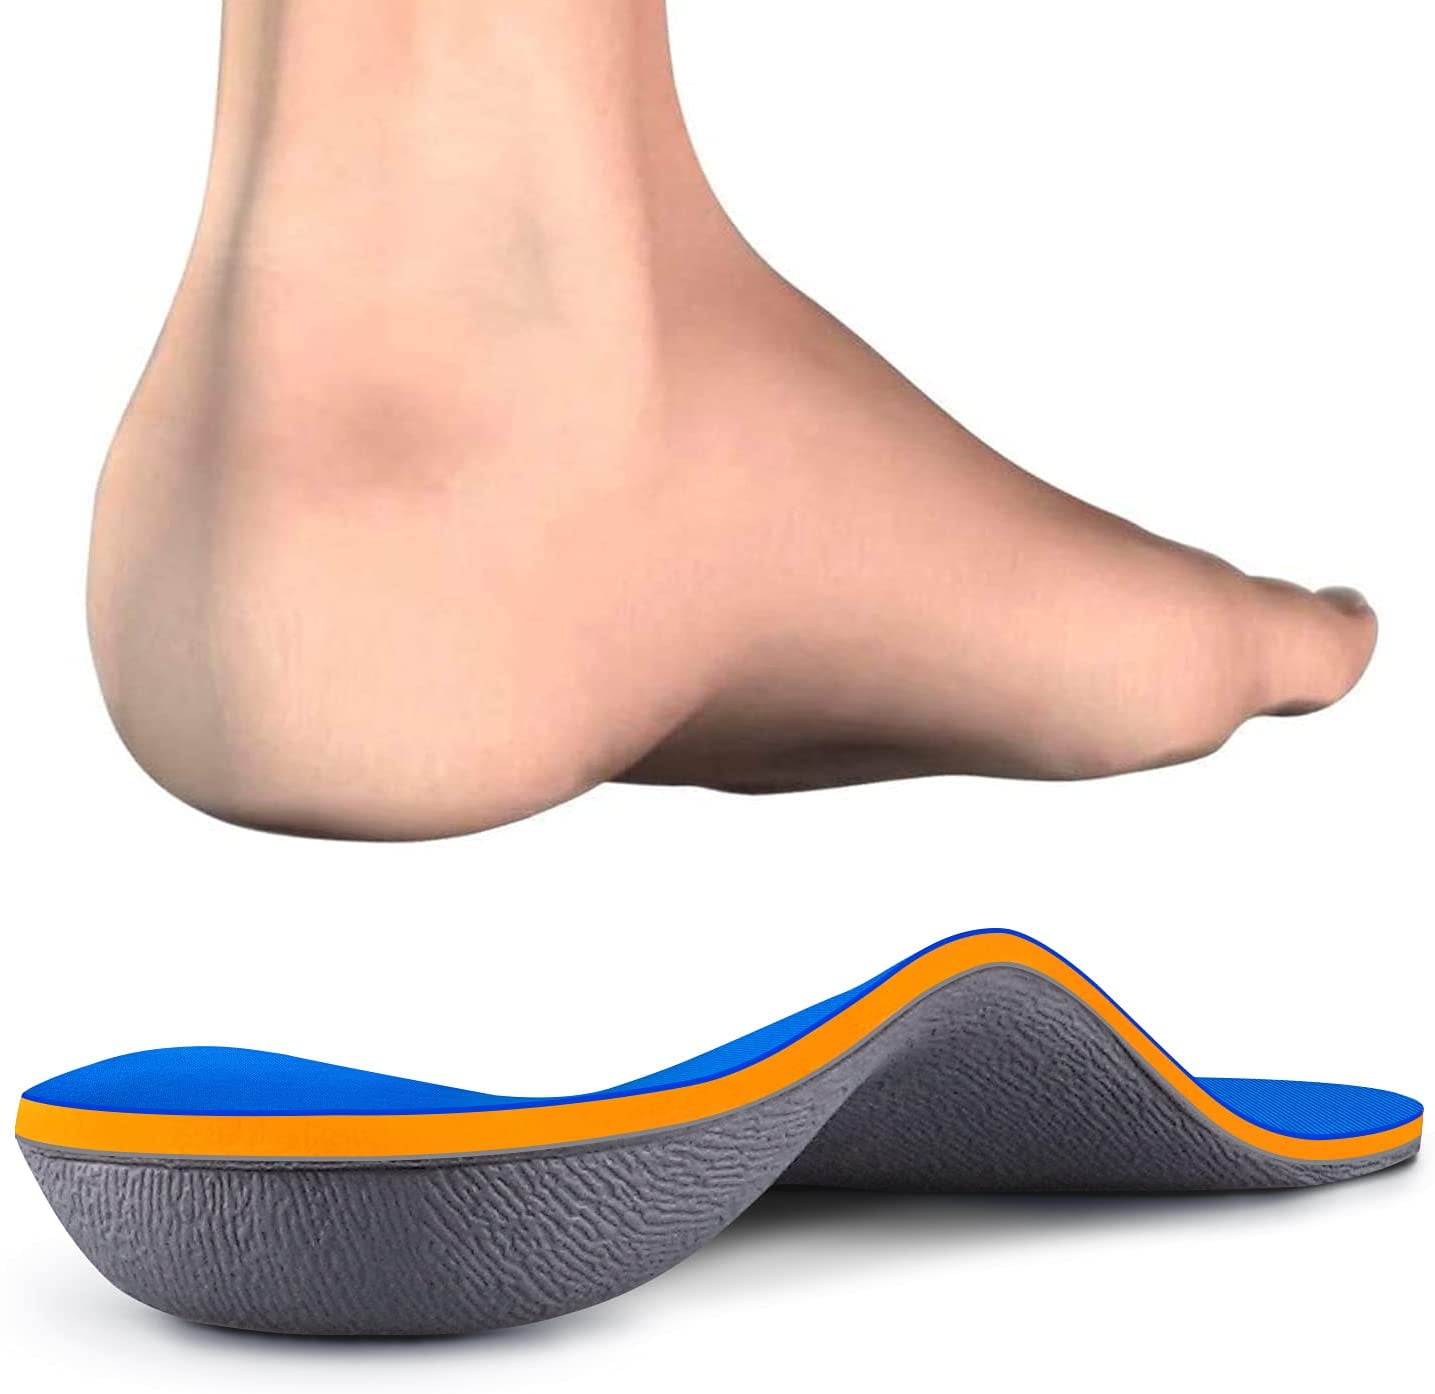 Topsole Flat Feet Metatarsal Orthotic Insoles Arch Support Full Length Inserts M 